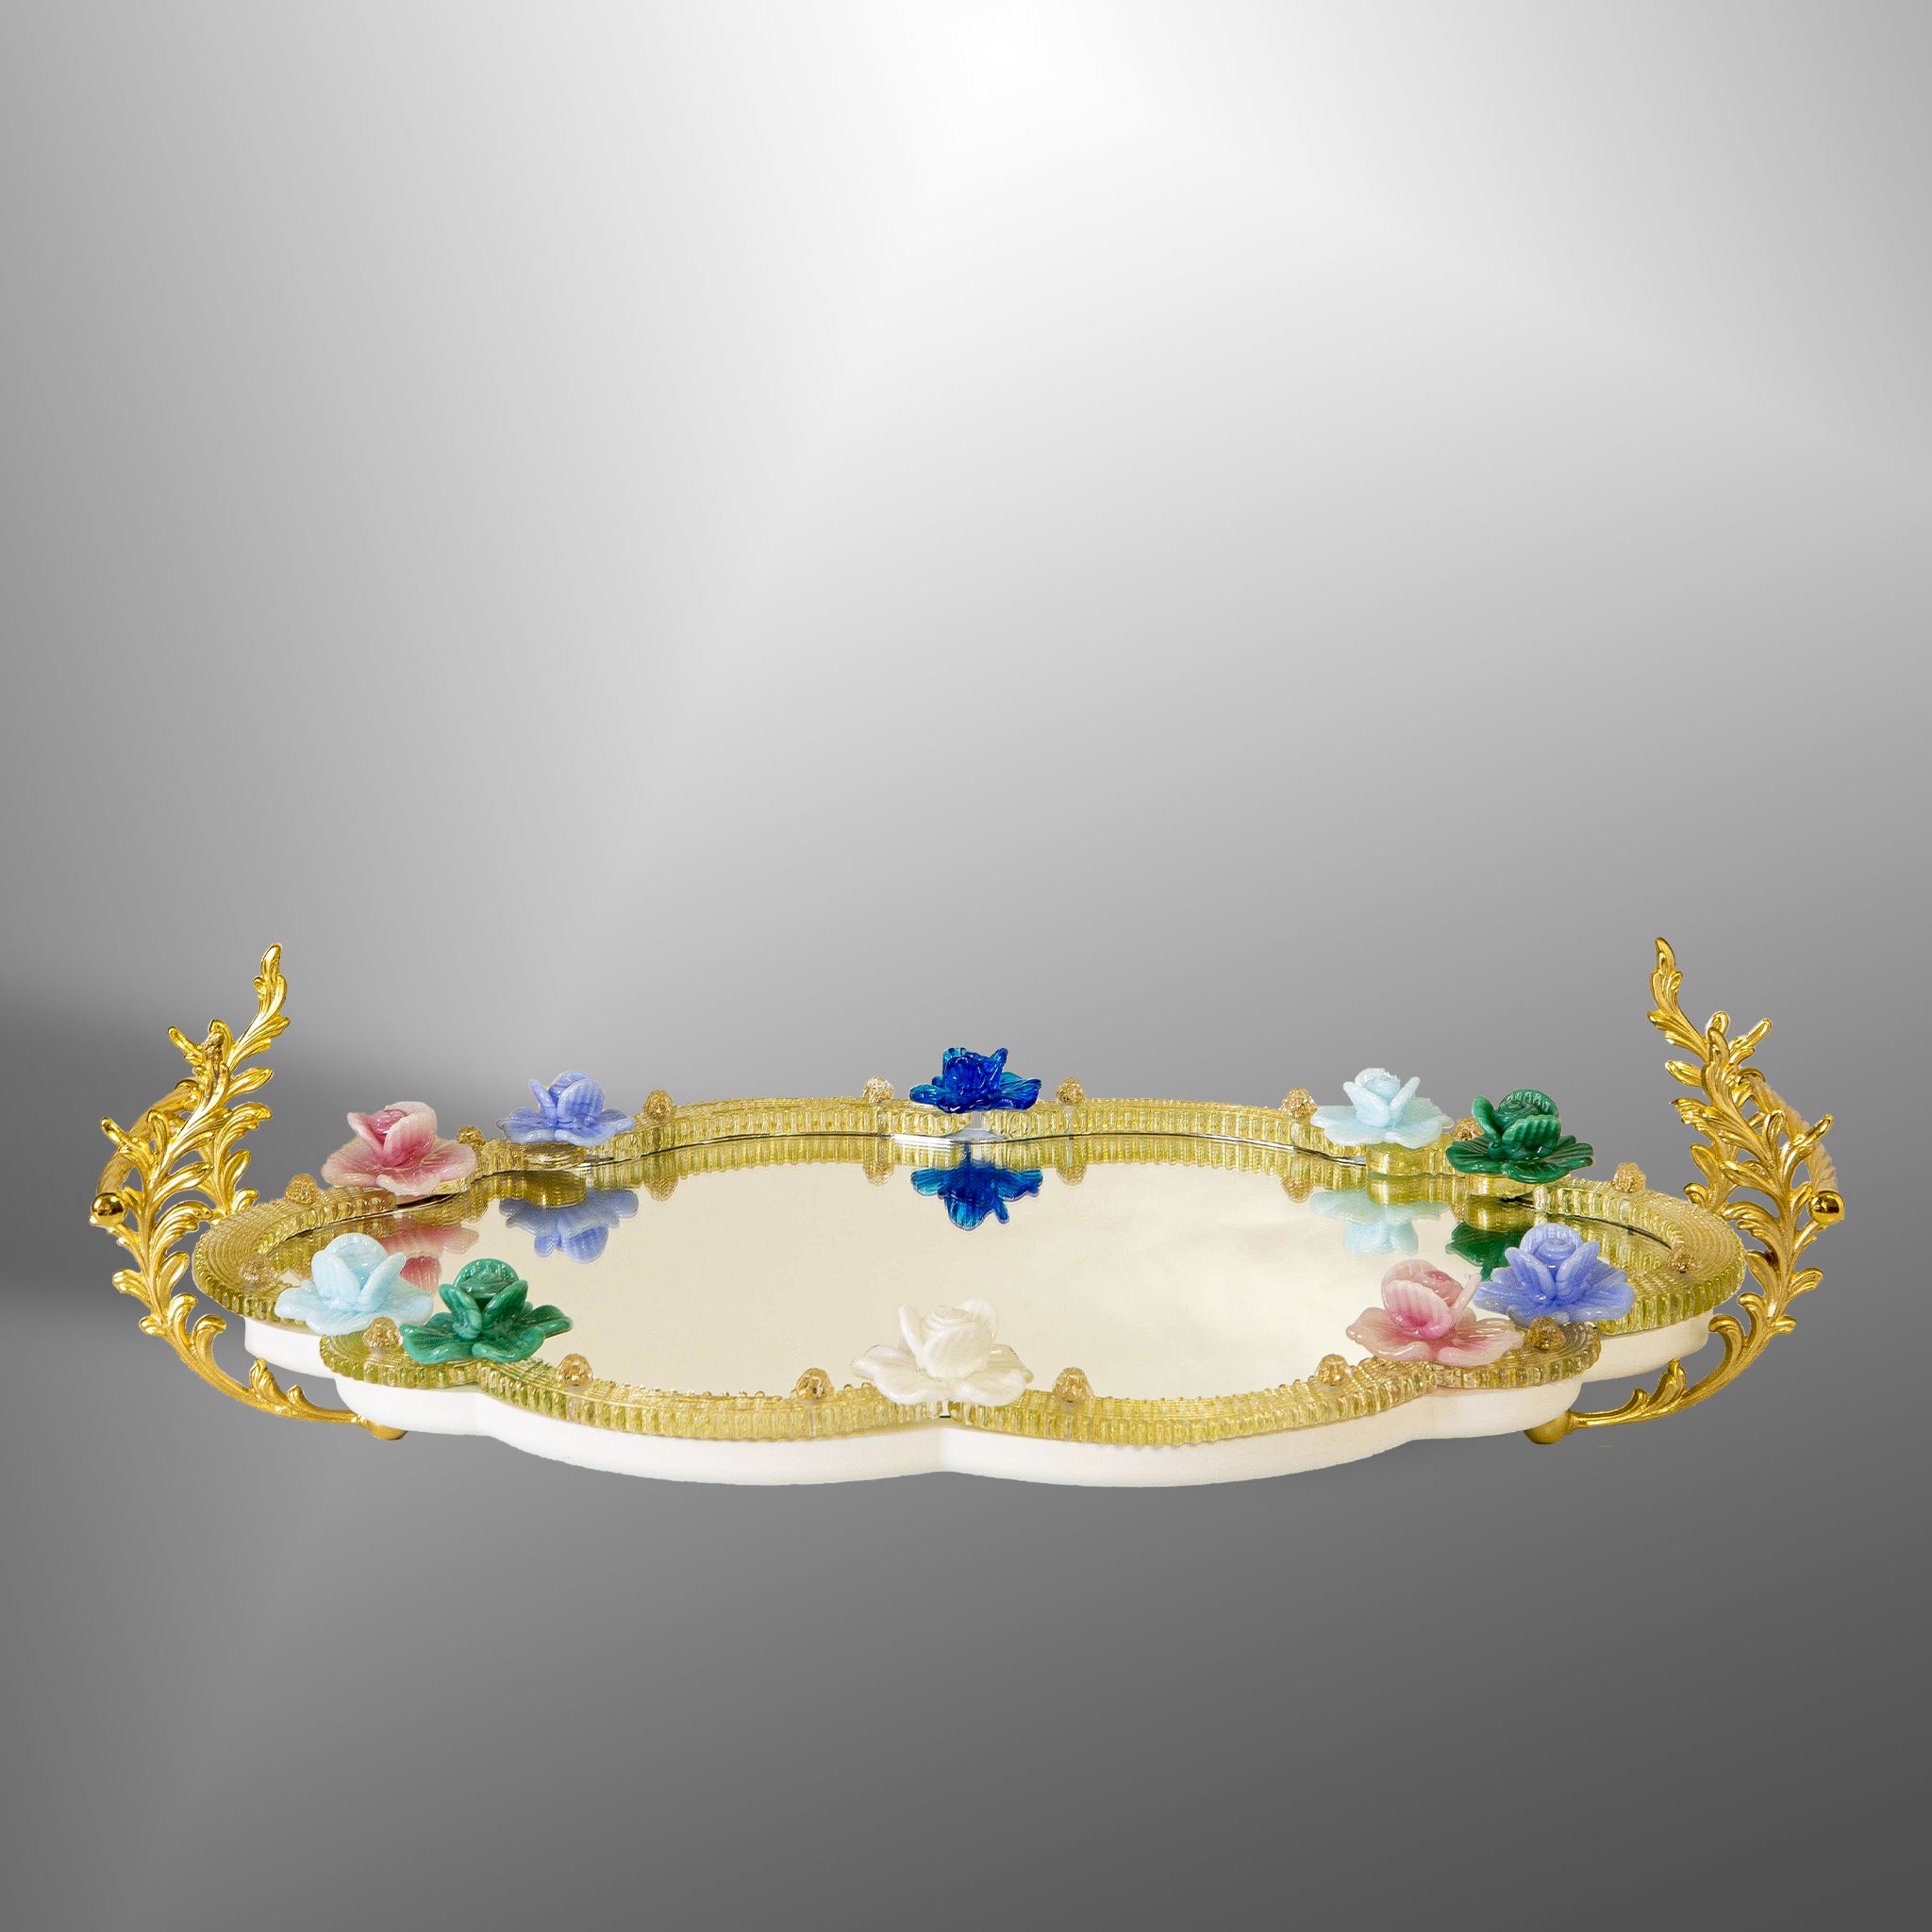 Big tray with brass handles and colorful flowers